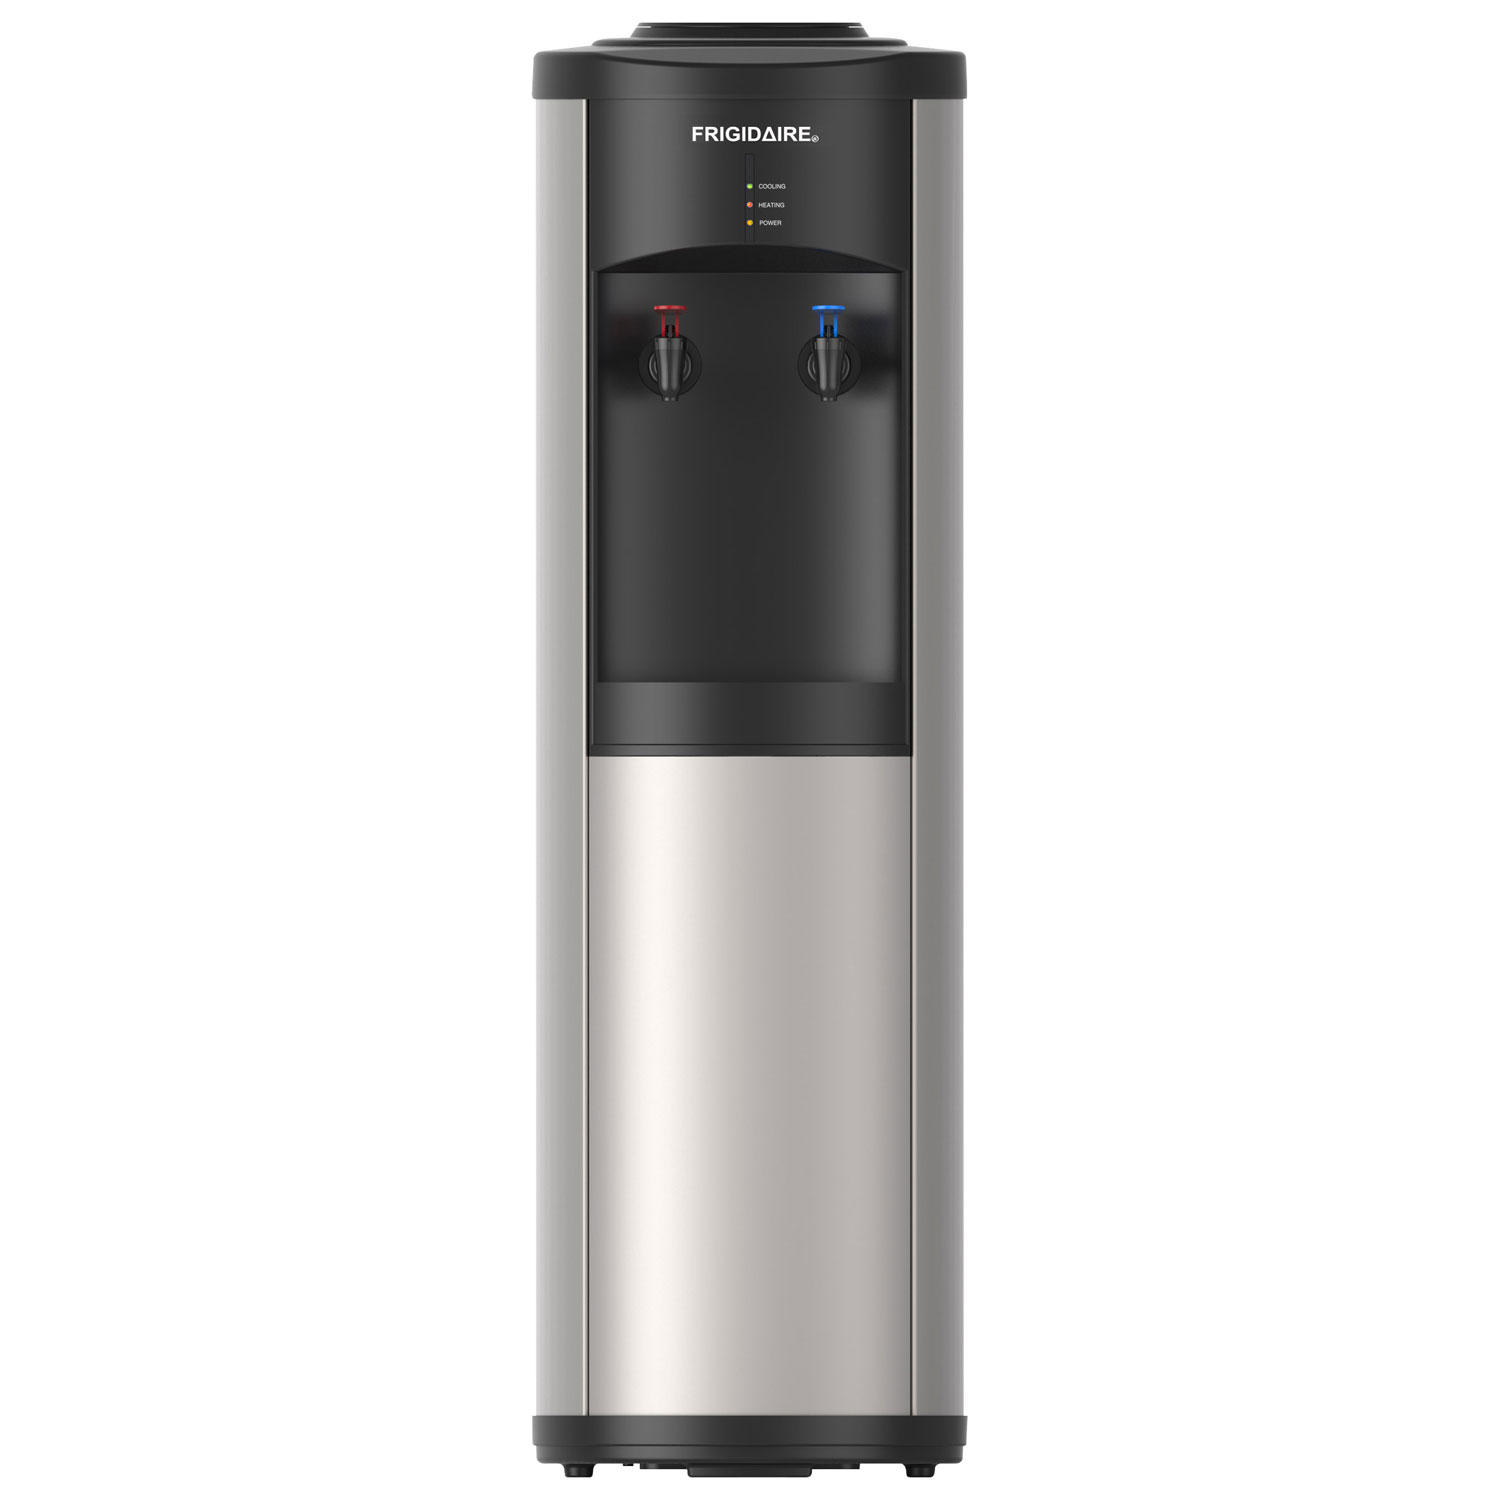 Frigidaire Hot/Cold Water Dispenser (EFWC519) - Stainless Steel